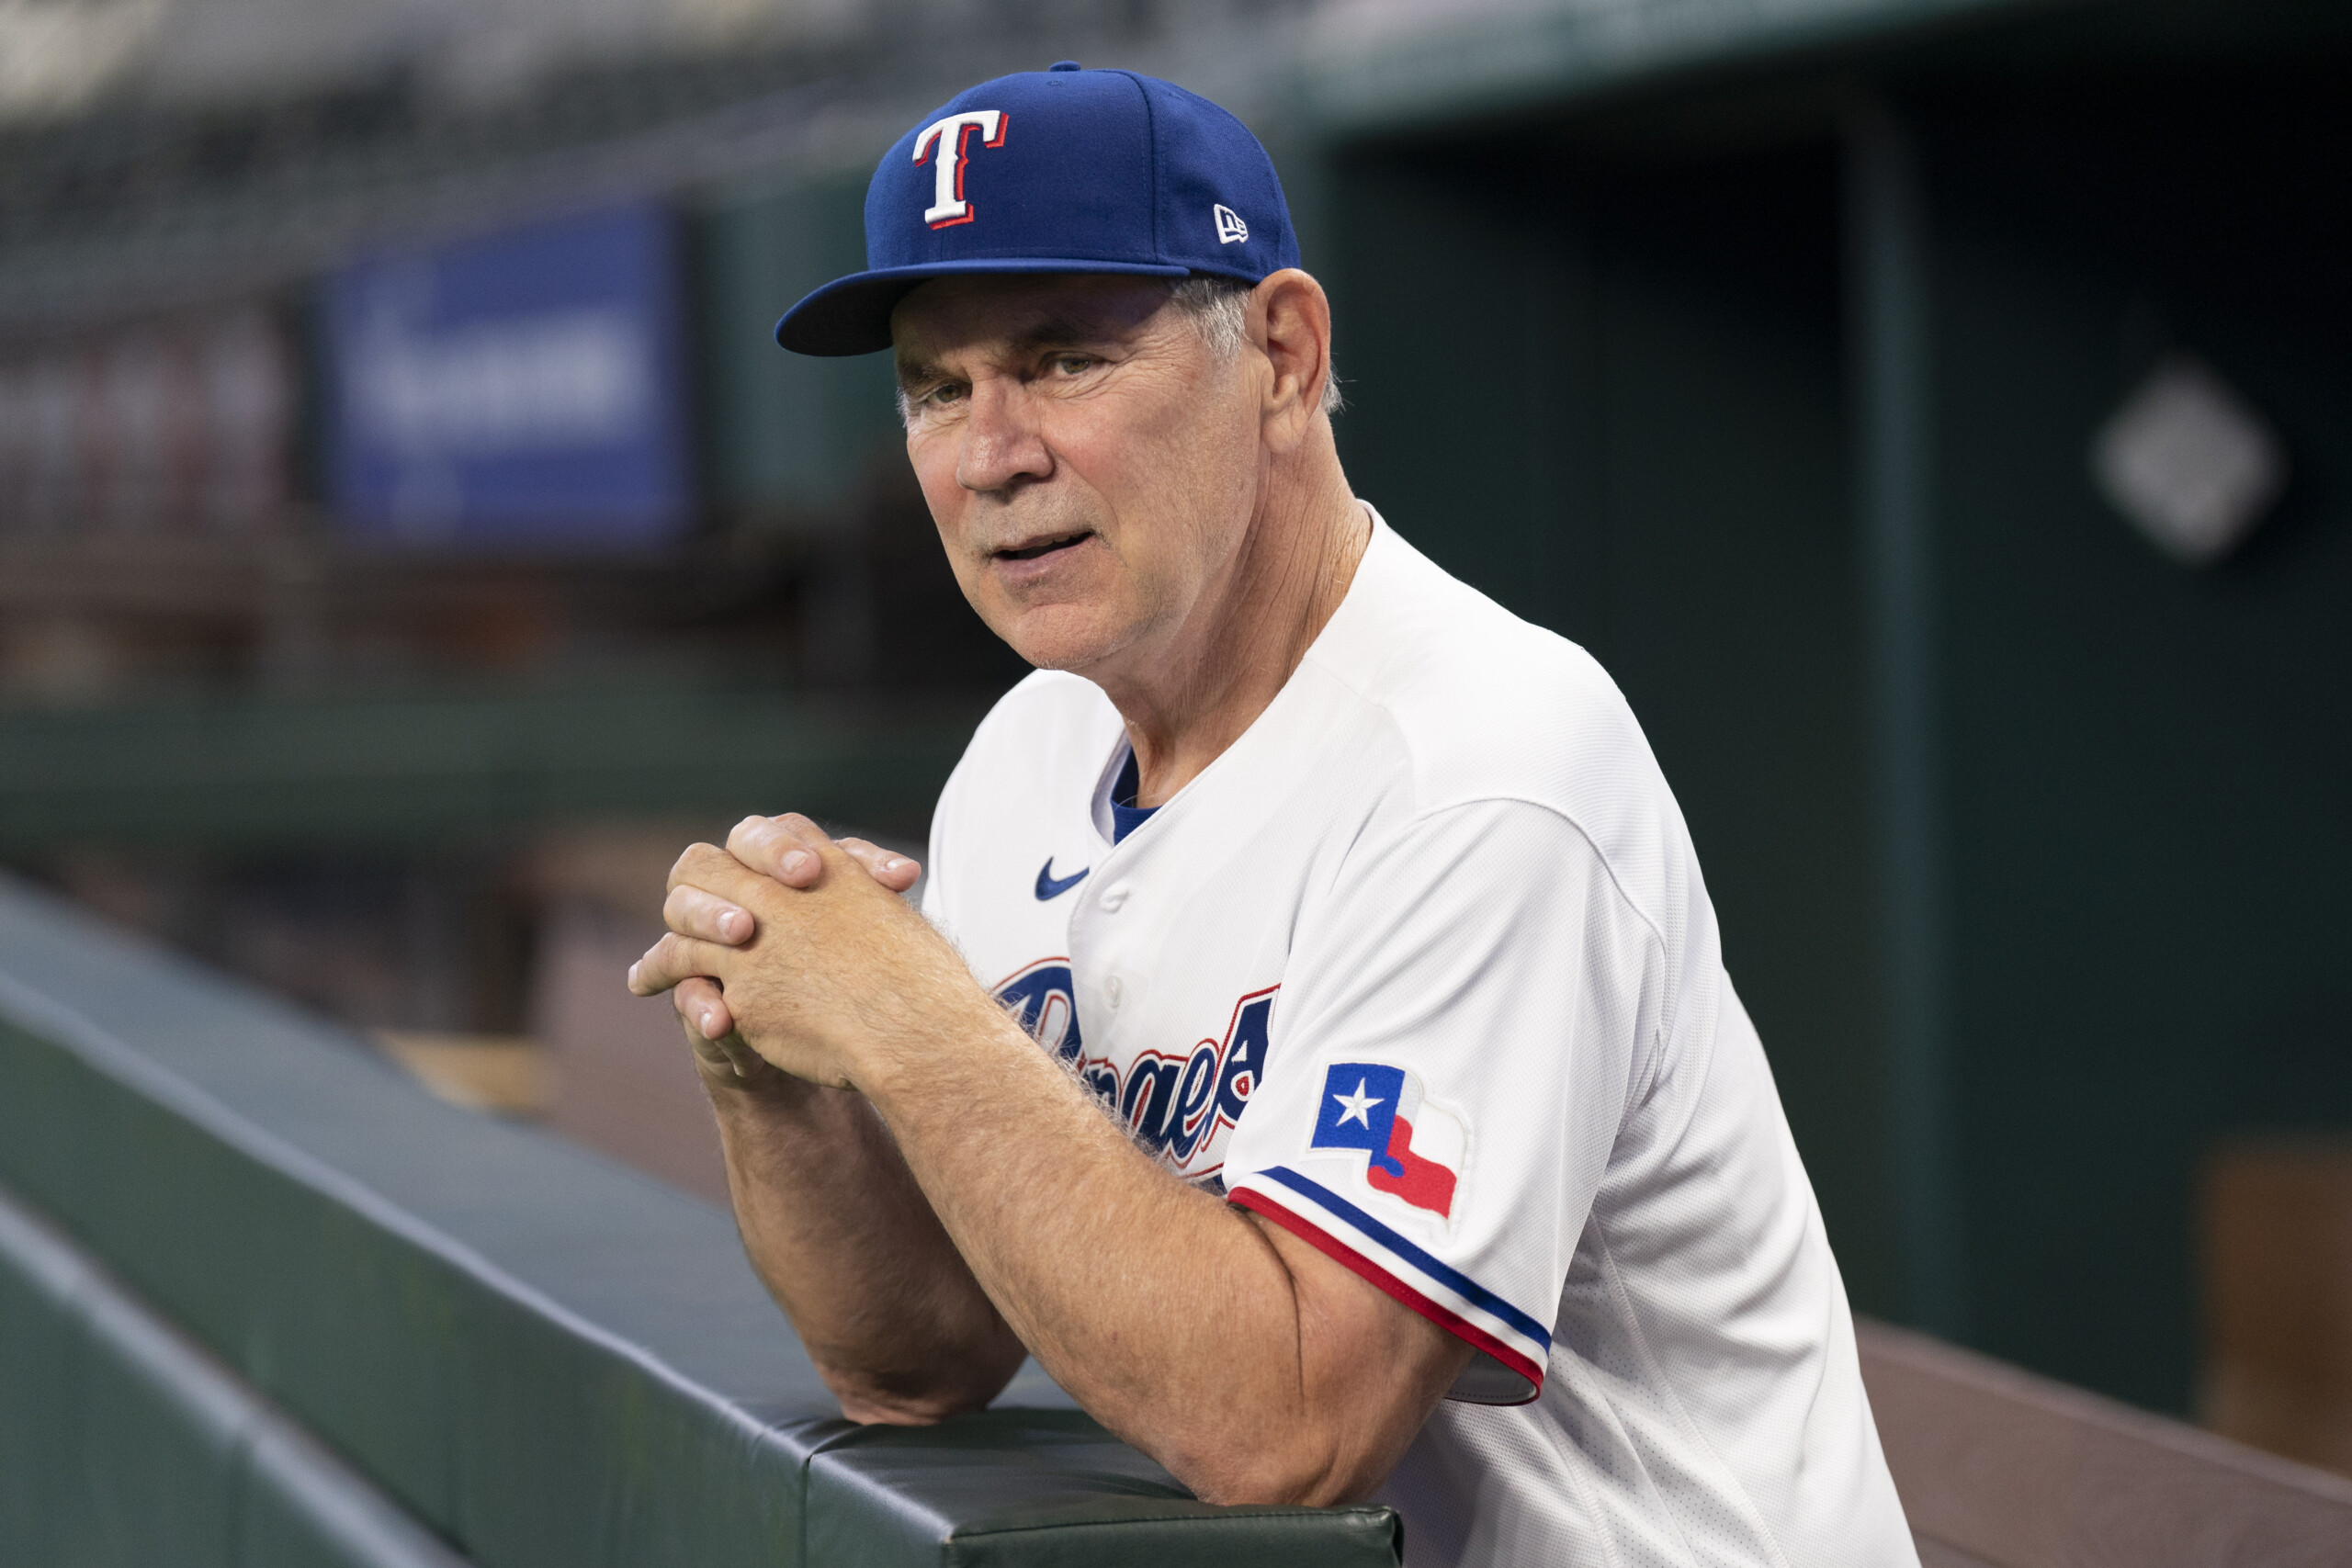 Steady as ever, Rangers manager Bruce Bochy is back where he